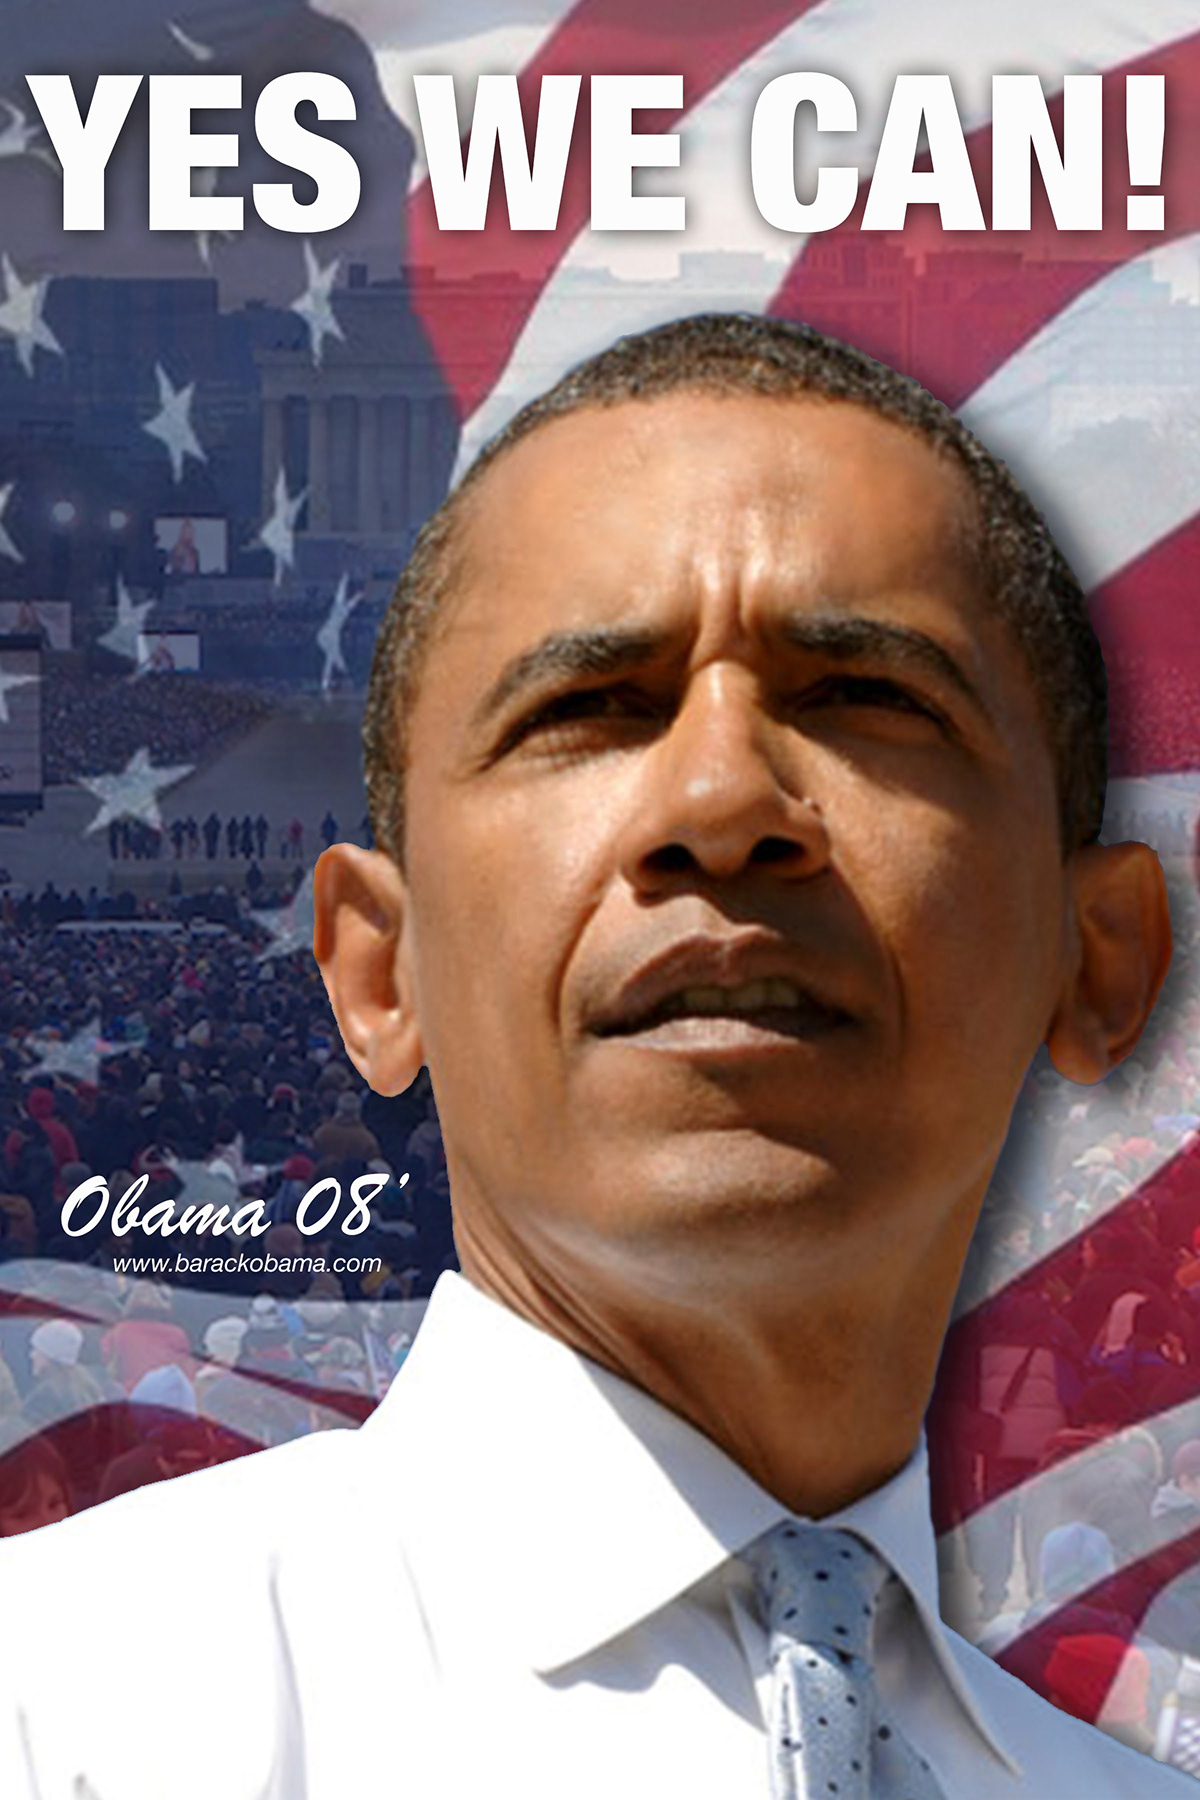 Barack Obama obama yes we can poster campaign Yes We Did 08' president Election lovely